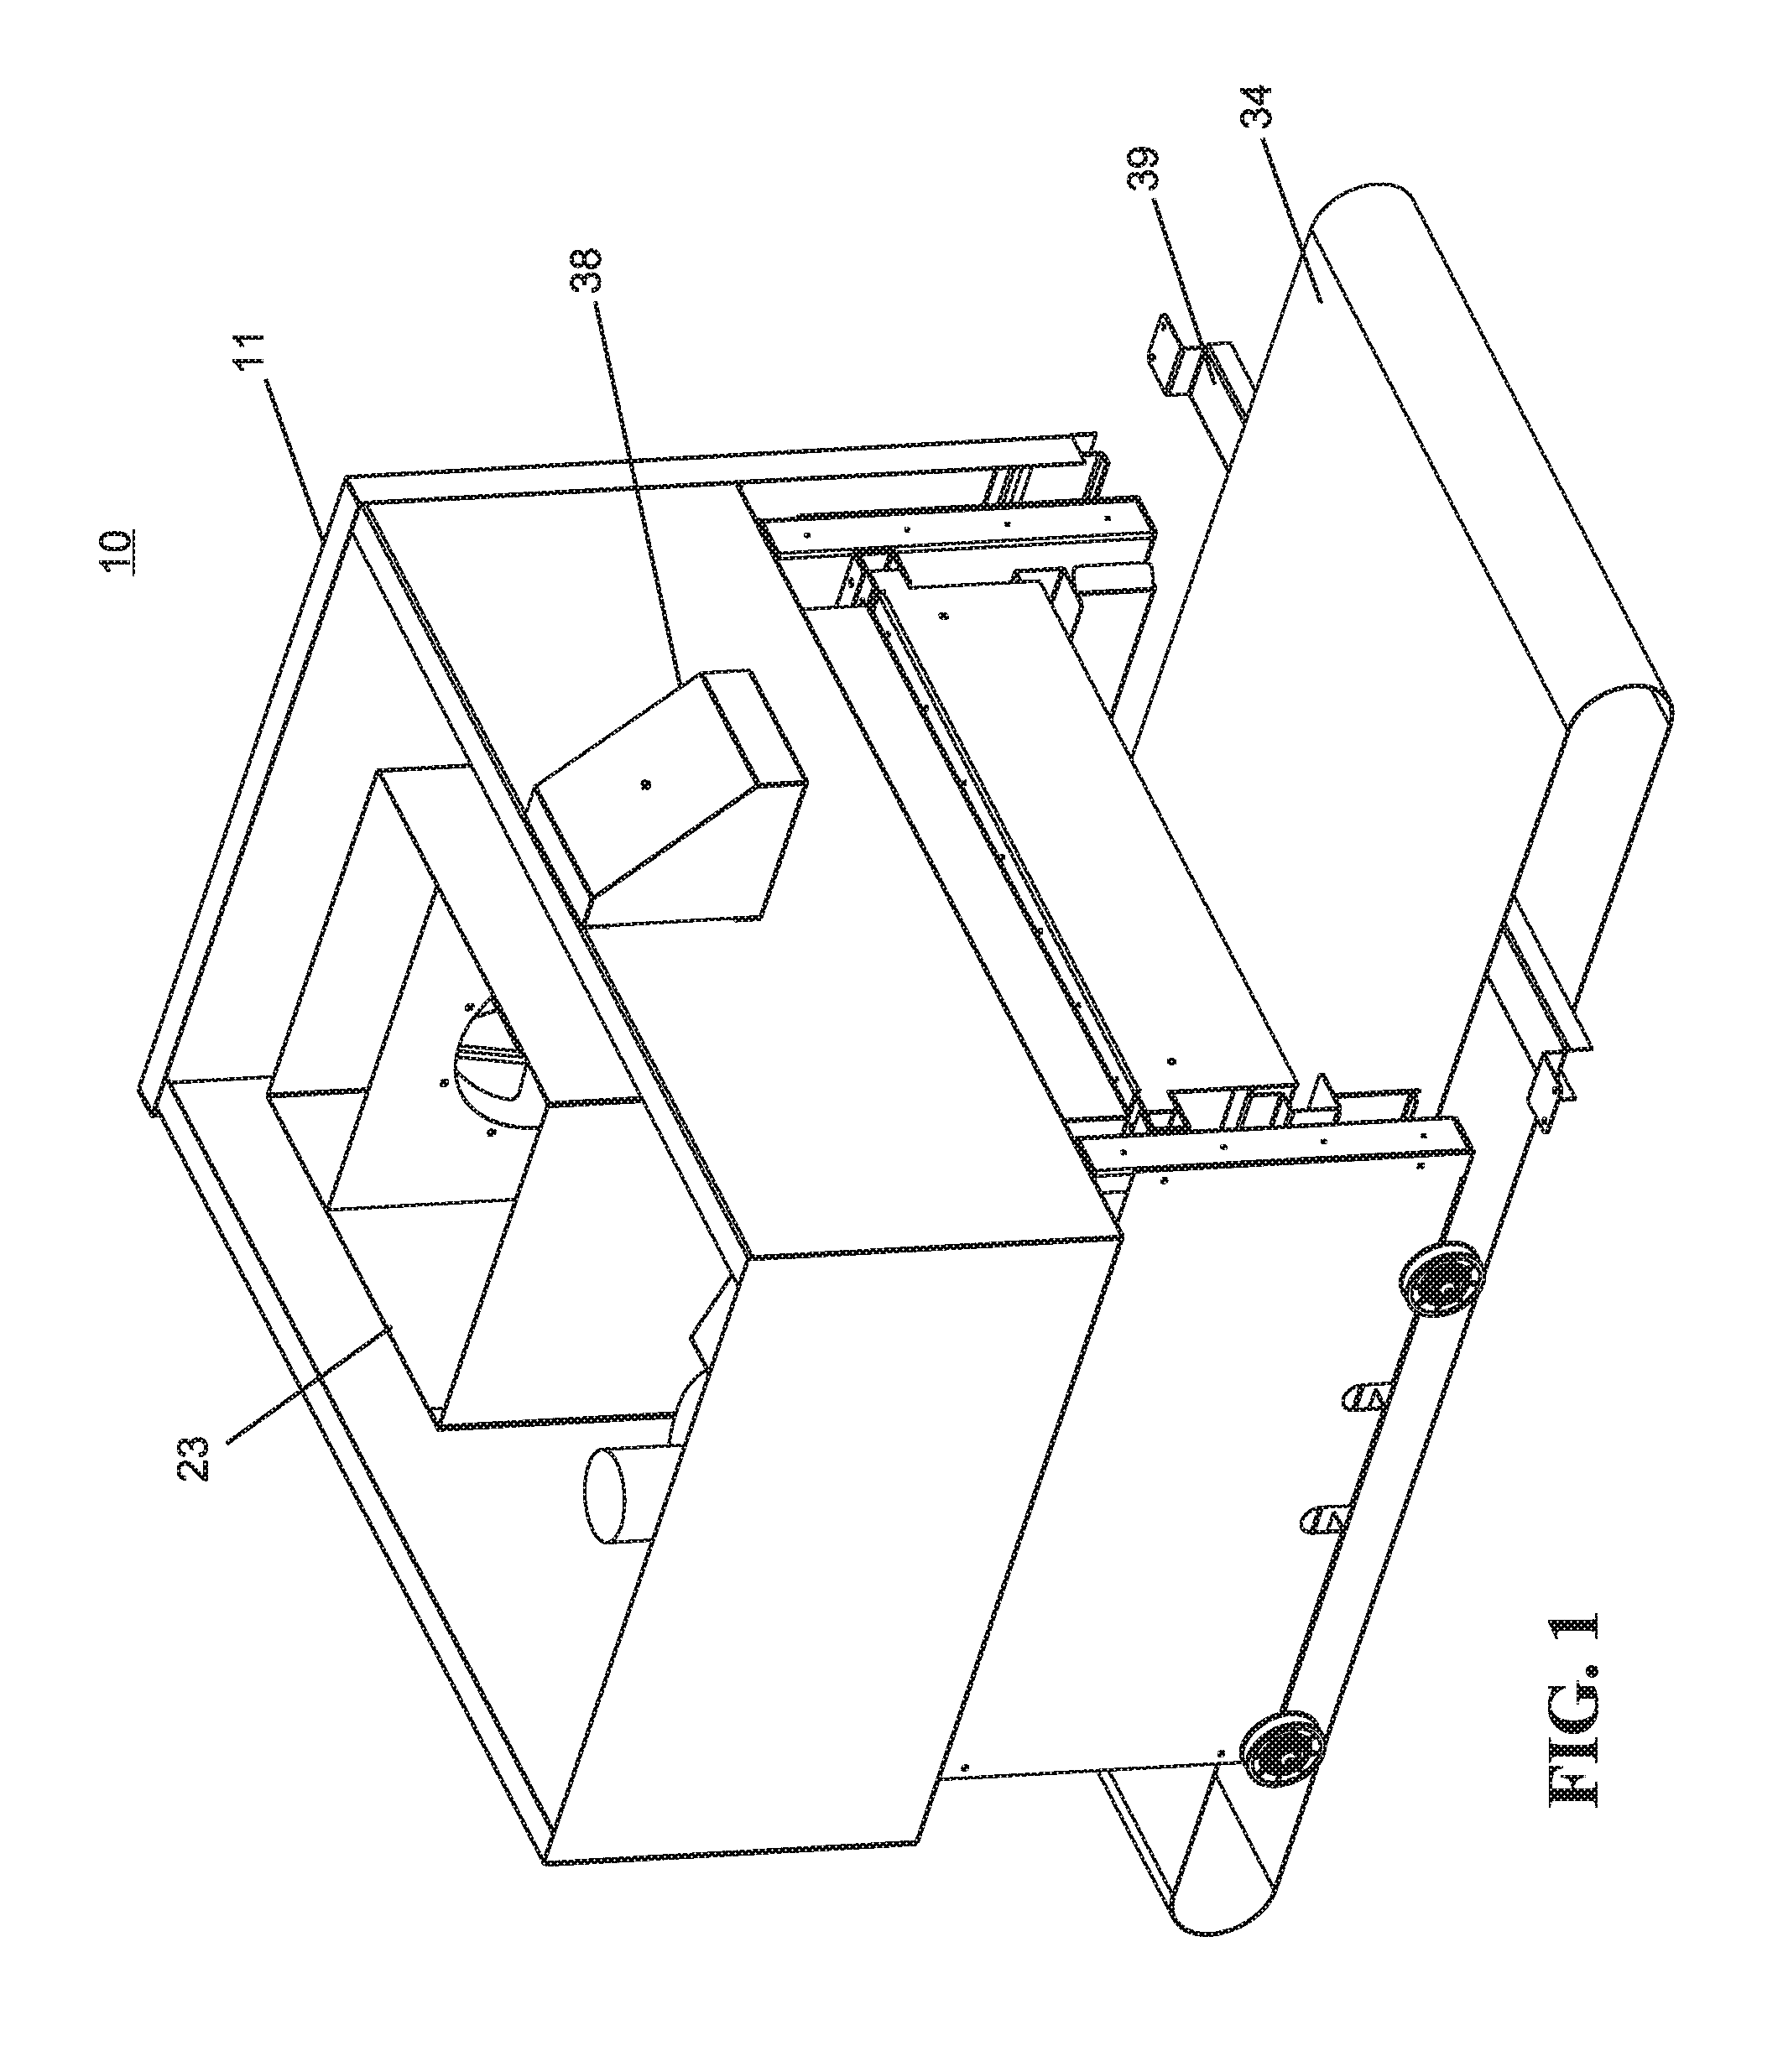 Ink curing apparatus and method